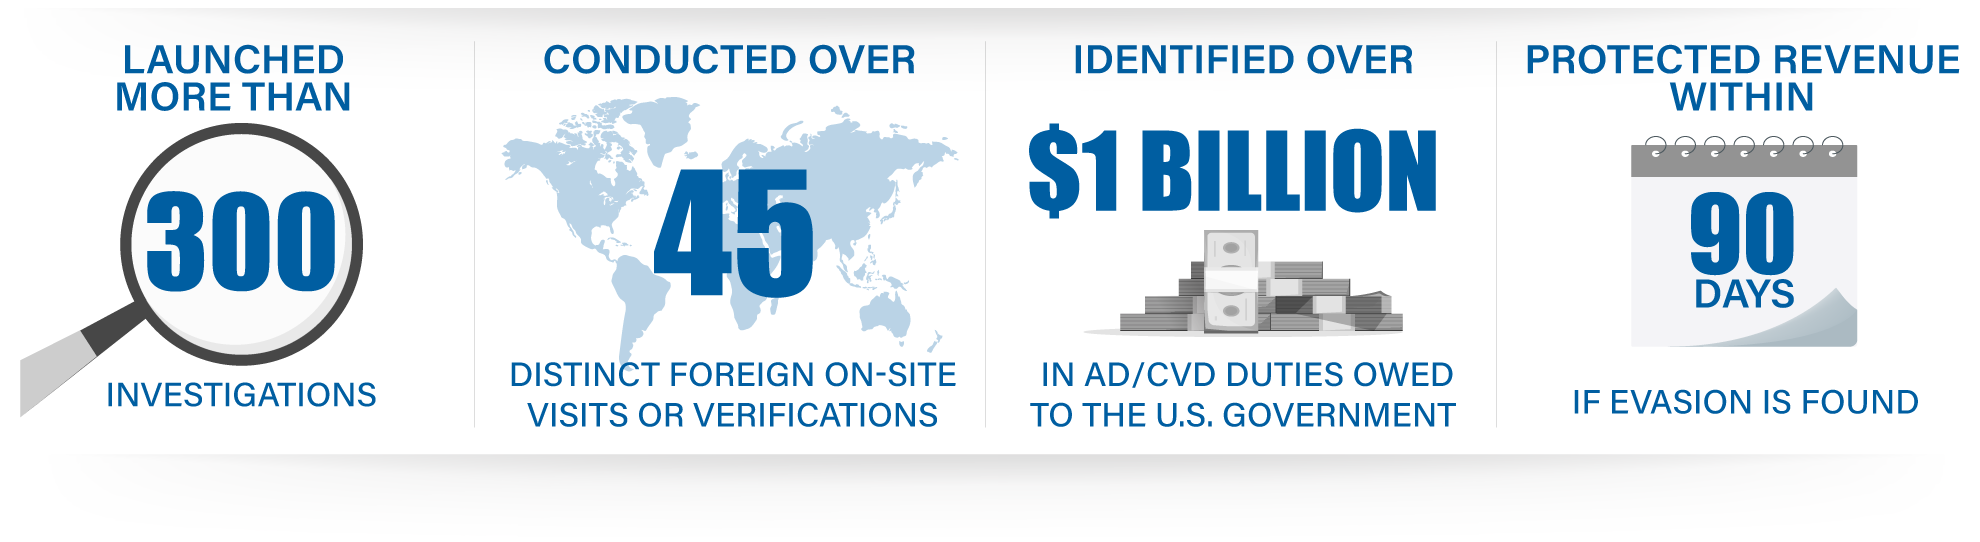 Infographic of EAPA Allegations: More than 300 launched. Conducted over 45 distinct foreign on-site visits or verifications. Identified over $1 Billion in AD?cvd duties owed to the U.S. Government. Protected revenue within 90 days if evation is found.